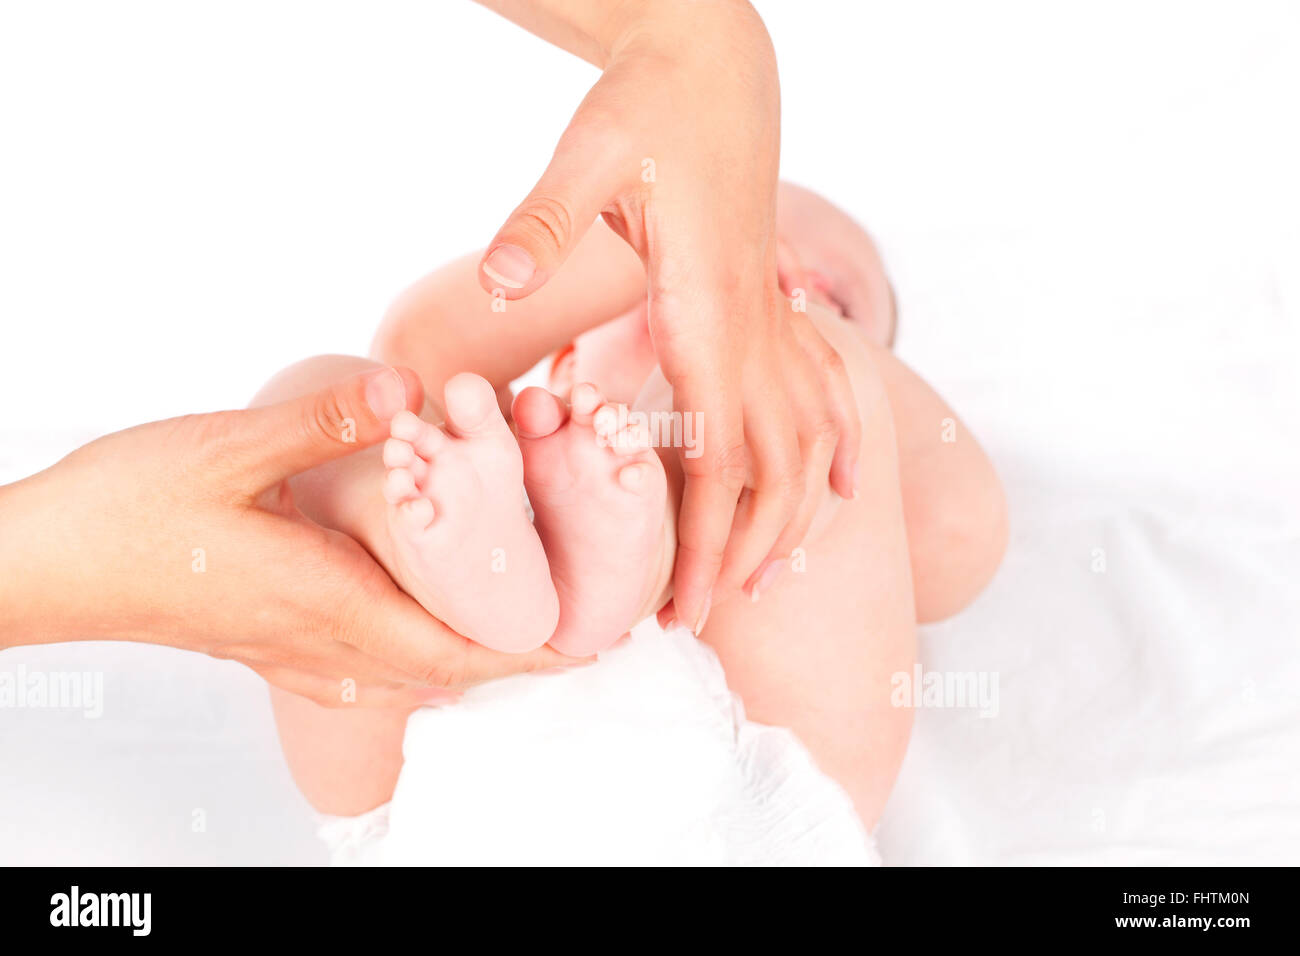 Parenting. Love, Affection, Care. Stock Photo